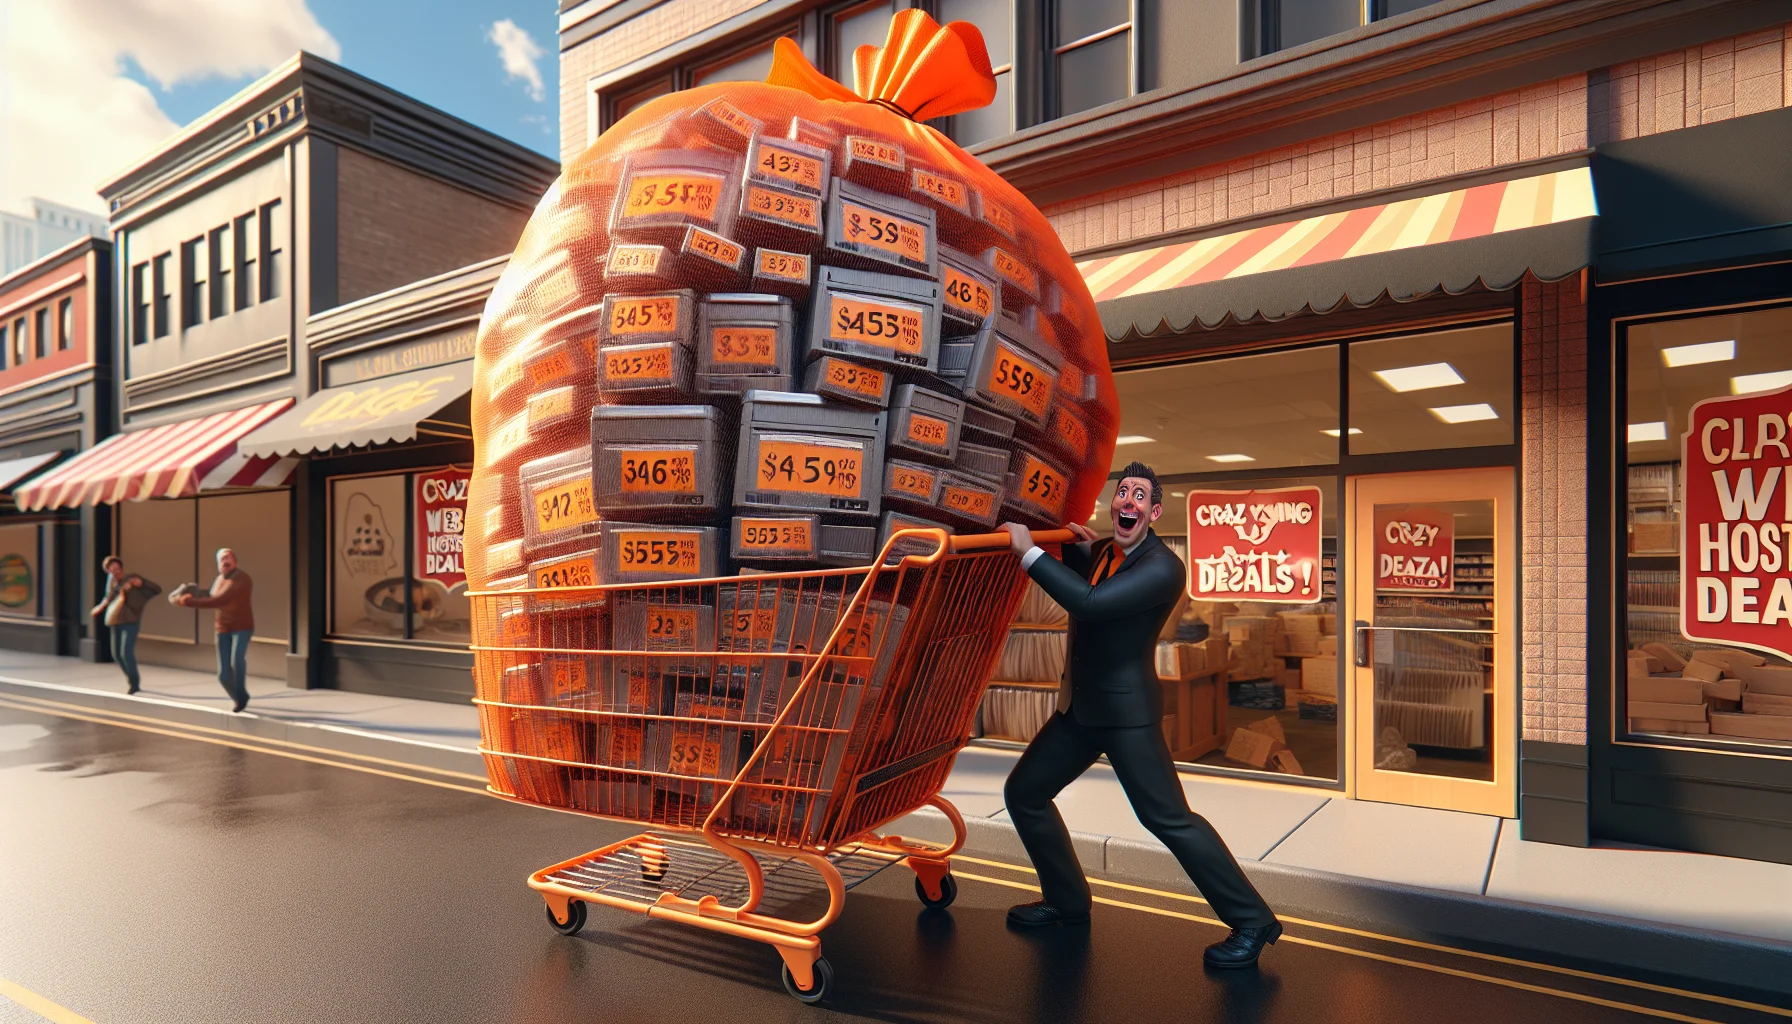 Create a humorous yet realistic image related to web hosting deals on a shopping extravaganza similar to Black Friday. The central theme should be an amount of web data encapsulated as an enormous orange bag, bulging and nearly ripping from the immense amount of 'data' inside. The bag will be located on a classic shopping cart that's squeaking and barely able to hold it. Maybe a Caucasian male customer with a wide grin on his face is pushing the cart, his eyes wide with the unbelief of the marvelous deal he just got. A storefront in the background could have a sign reading, 'Crazy Web Hosting Deals!'. This should create a sense of excitement and humor.